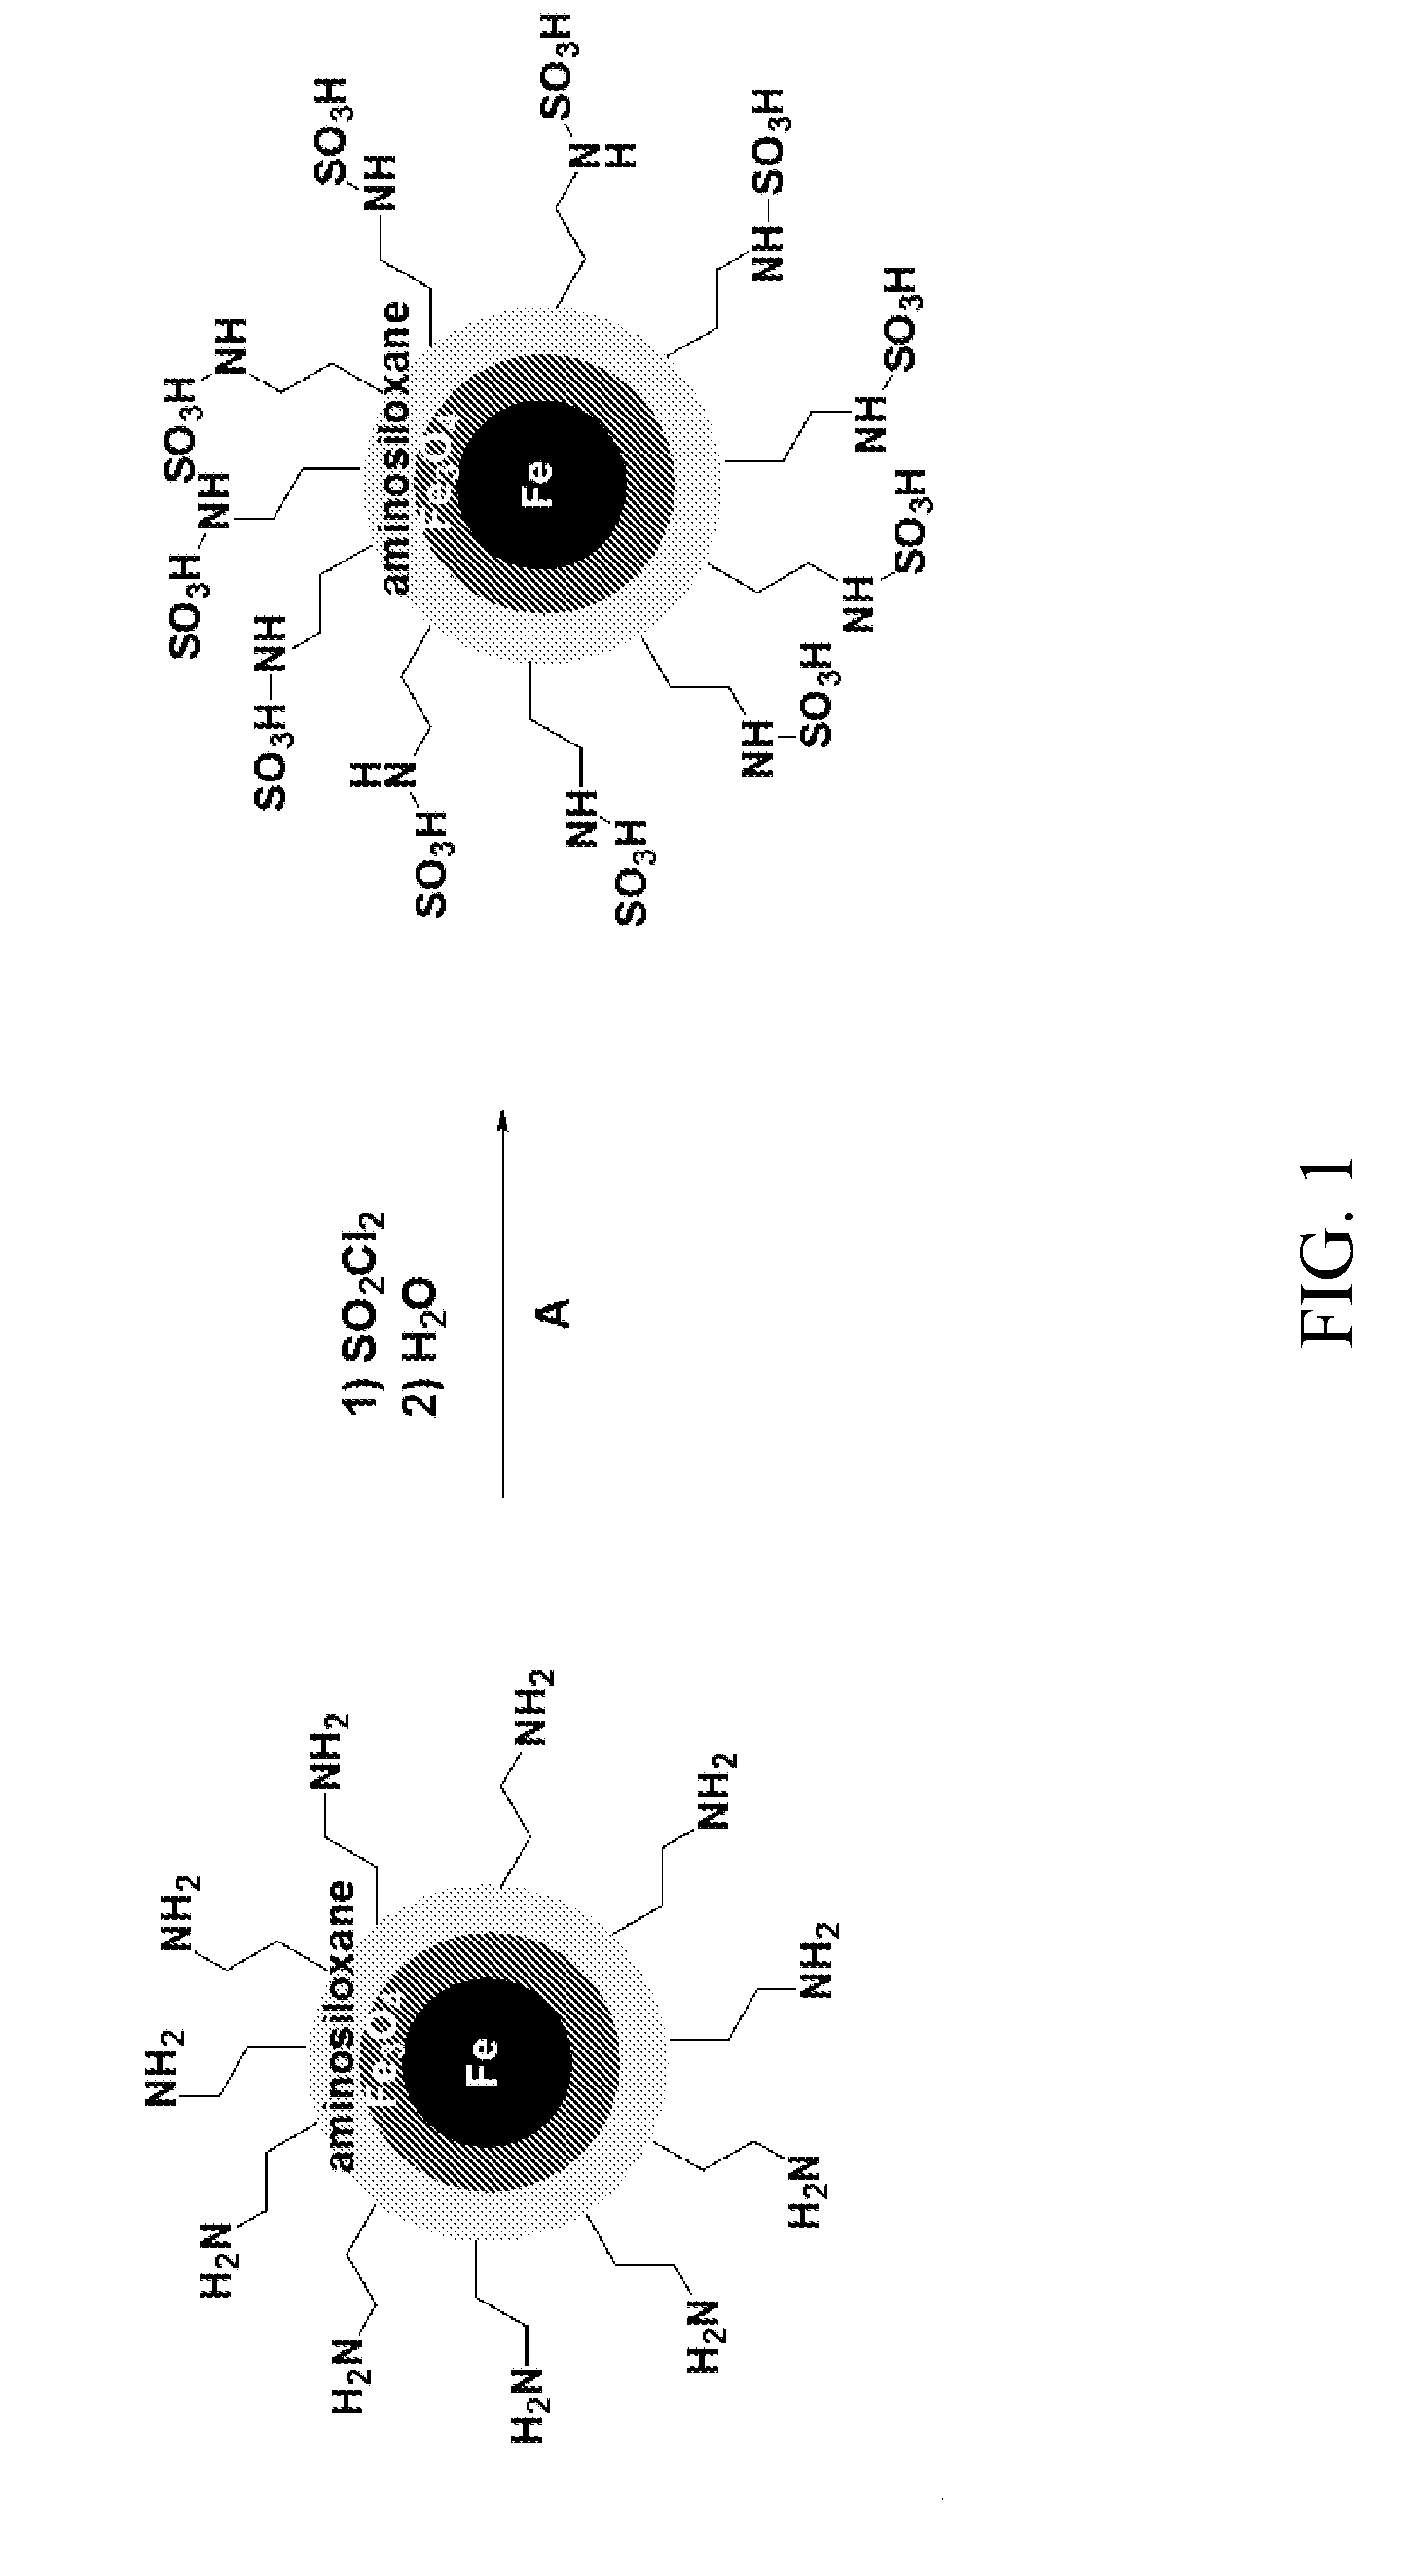 Acid-functionalized nanoparticle catalyst and catalyzed reactions using the same